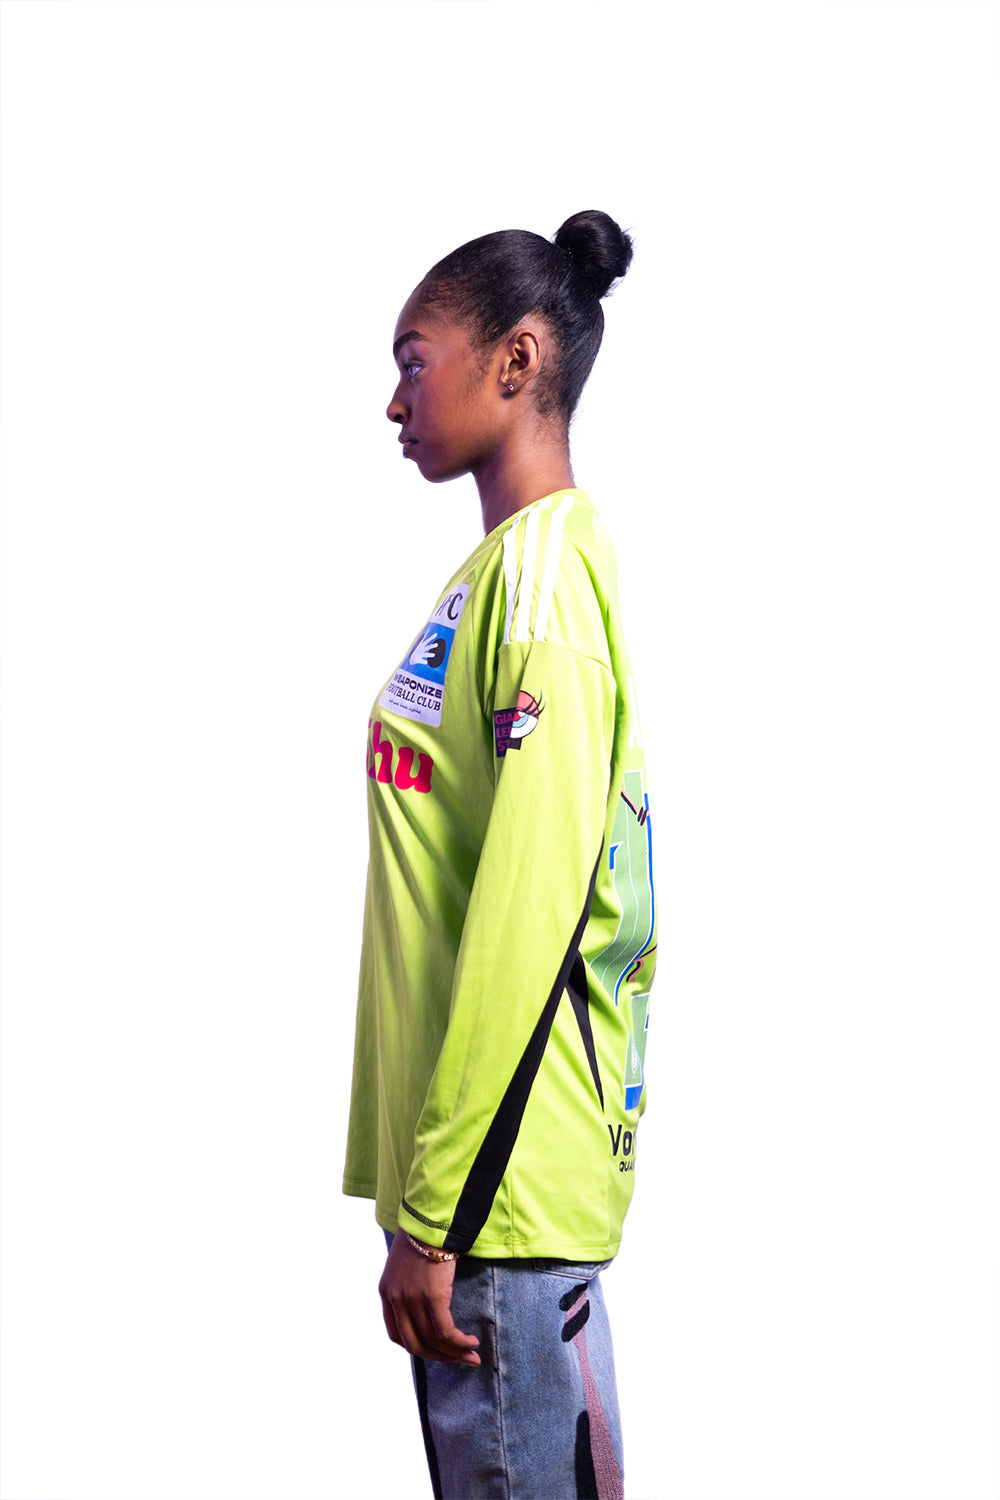 Weaponize Gallery - Authentic YUMYUM! SushiCup +HOME+ -Goalkeeper Jersey - Suchun Boativ'Olock